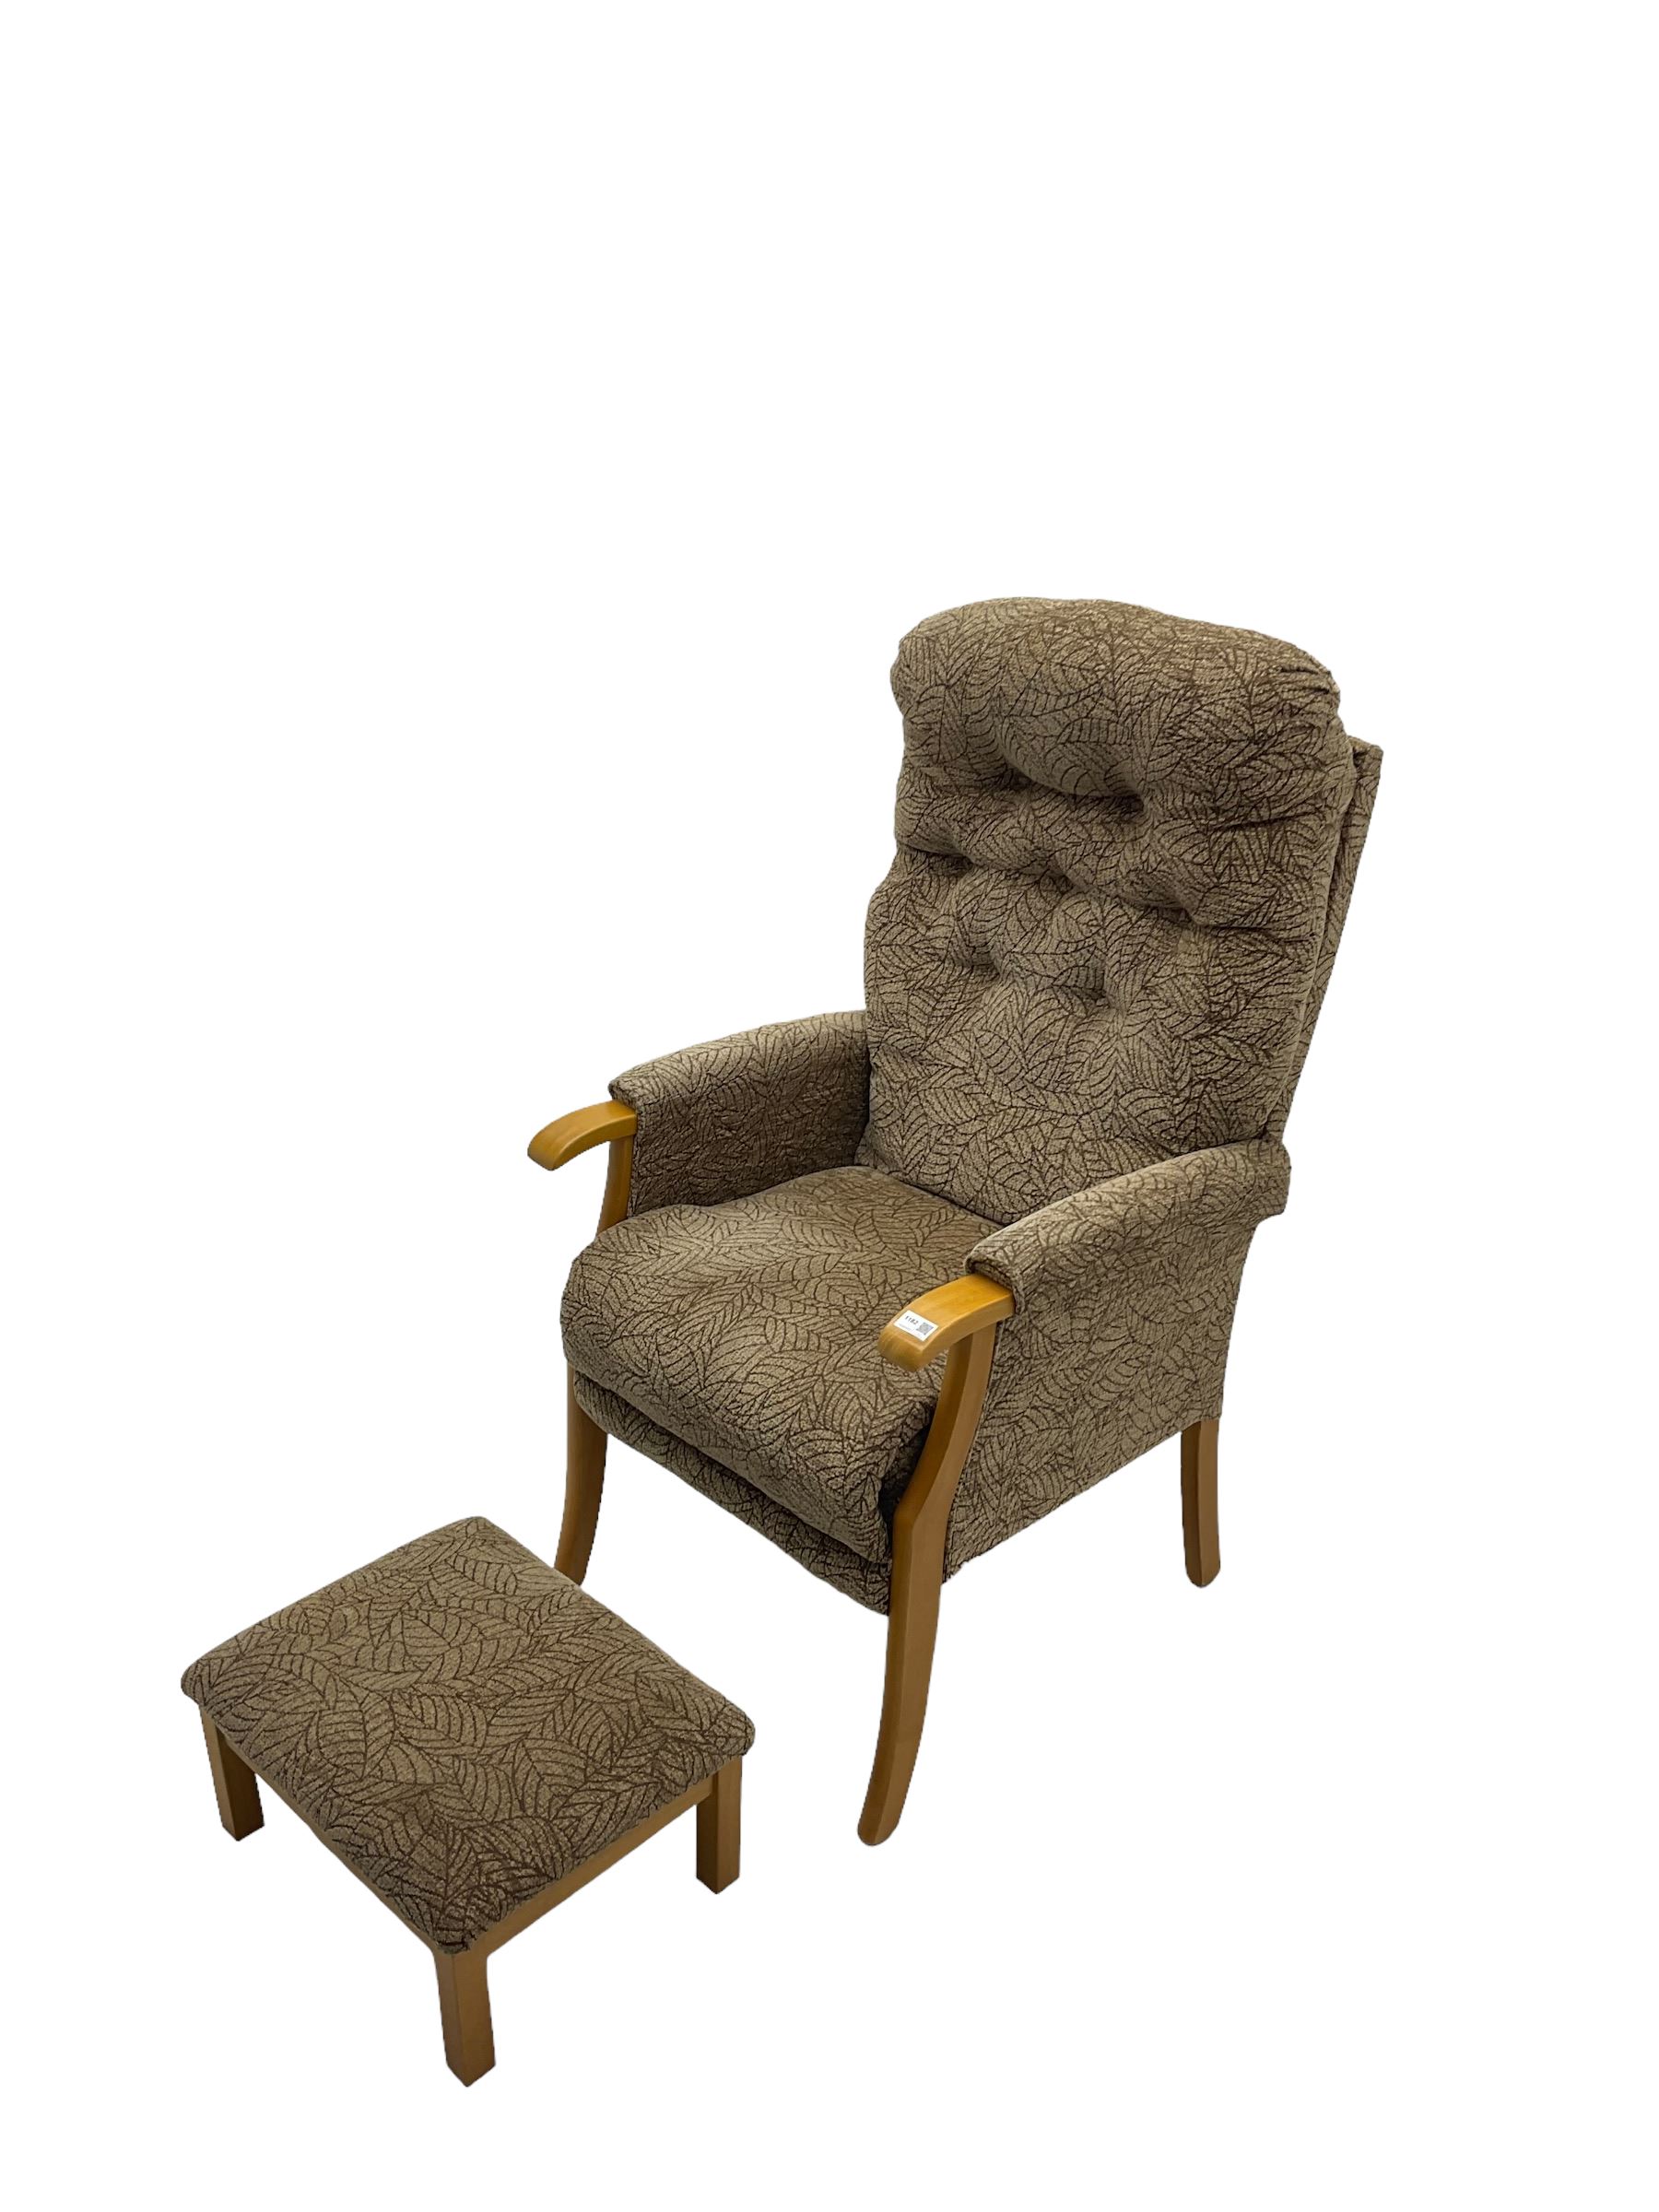 Late 20th century armchair - Image 5 of 6